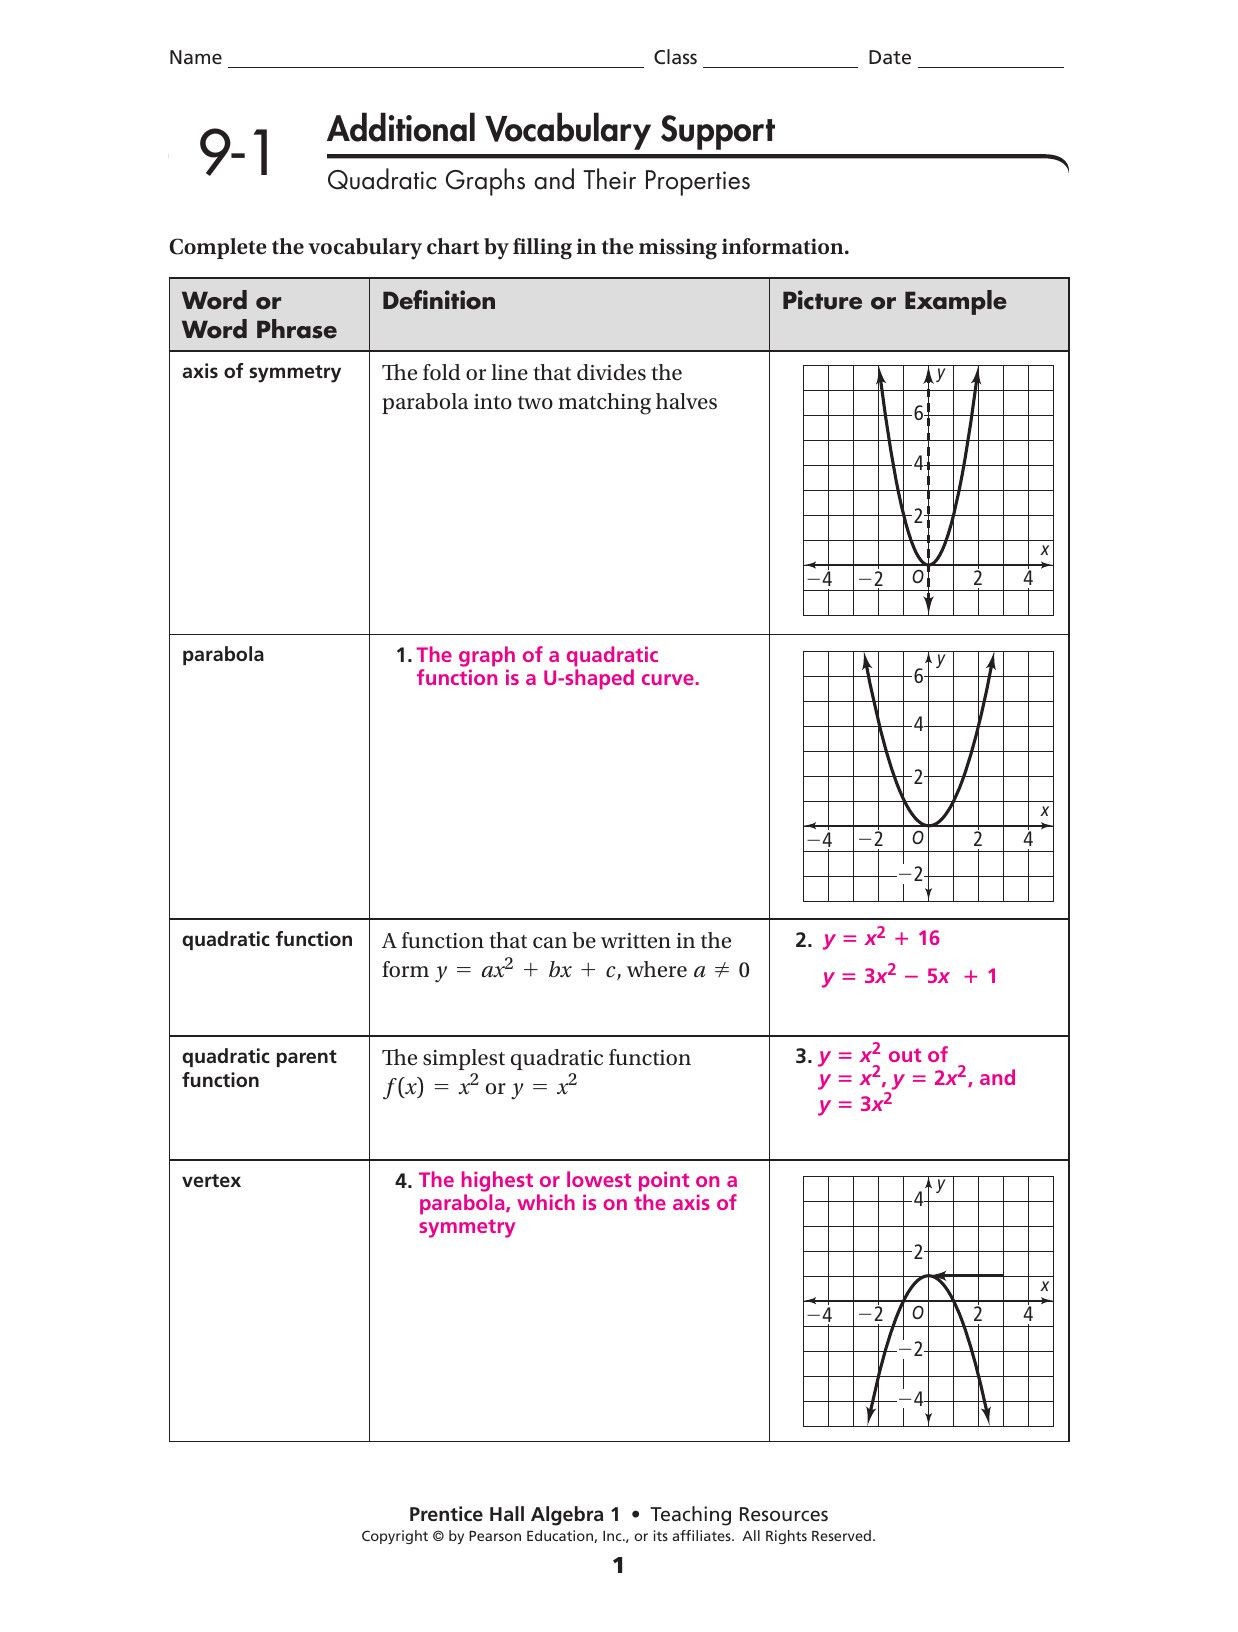 Quadratic Functions Worksheet Answers 4 Graphing Quadratic Functions Worksheet Answers Algebra 2